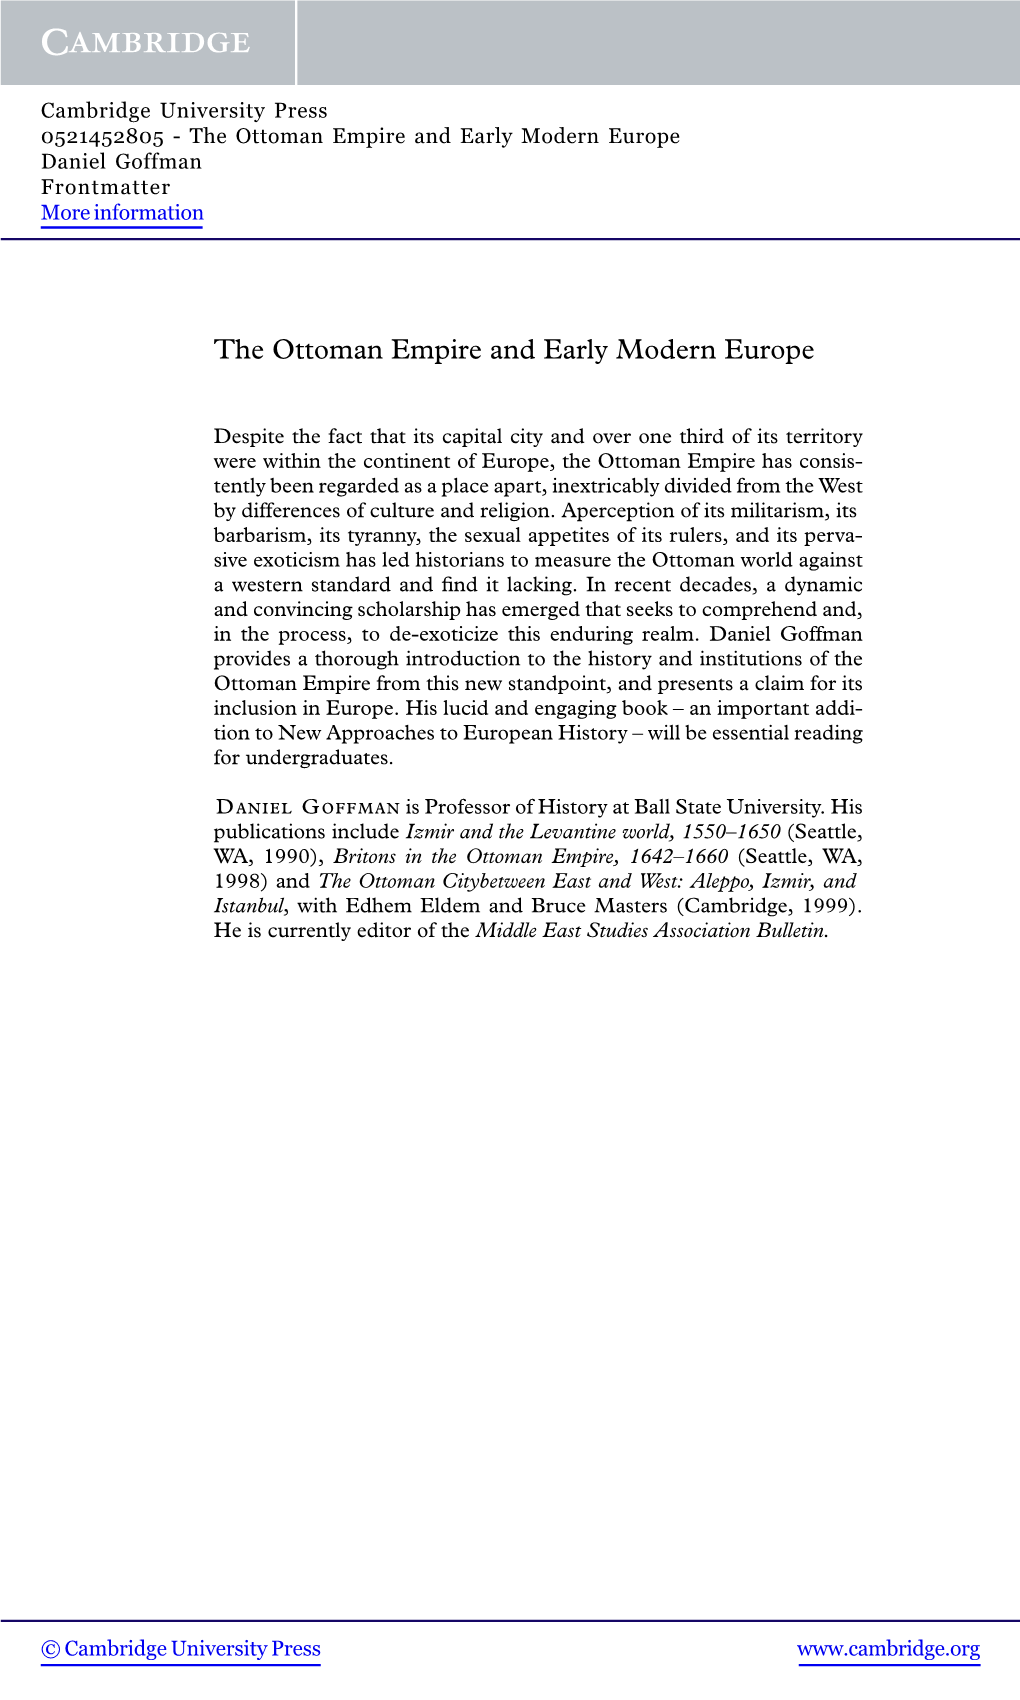 The Ottoman Empire and Early Modern Europe Daniel Goffman Frontmatter More Information